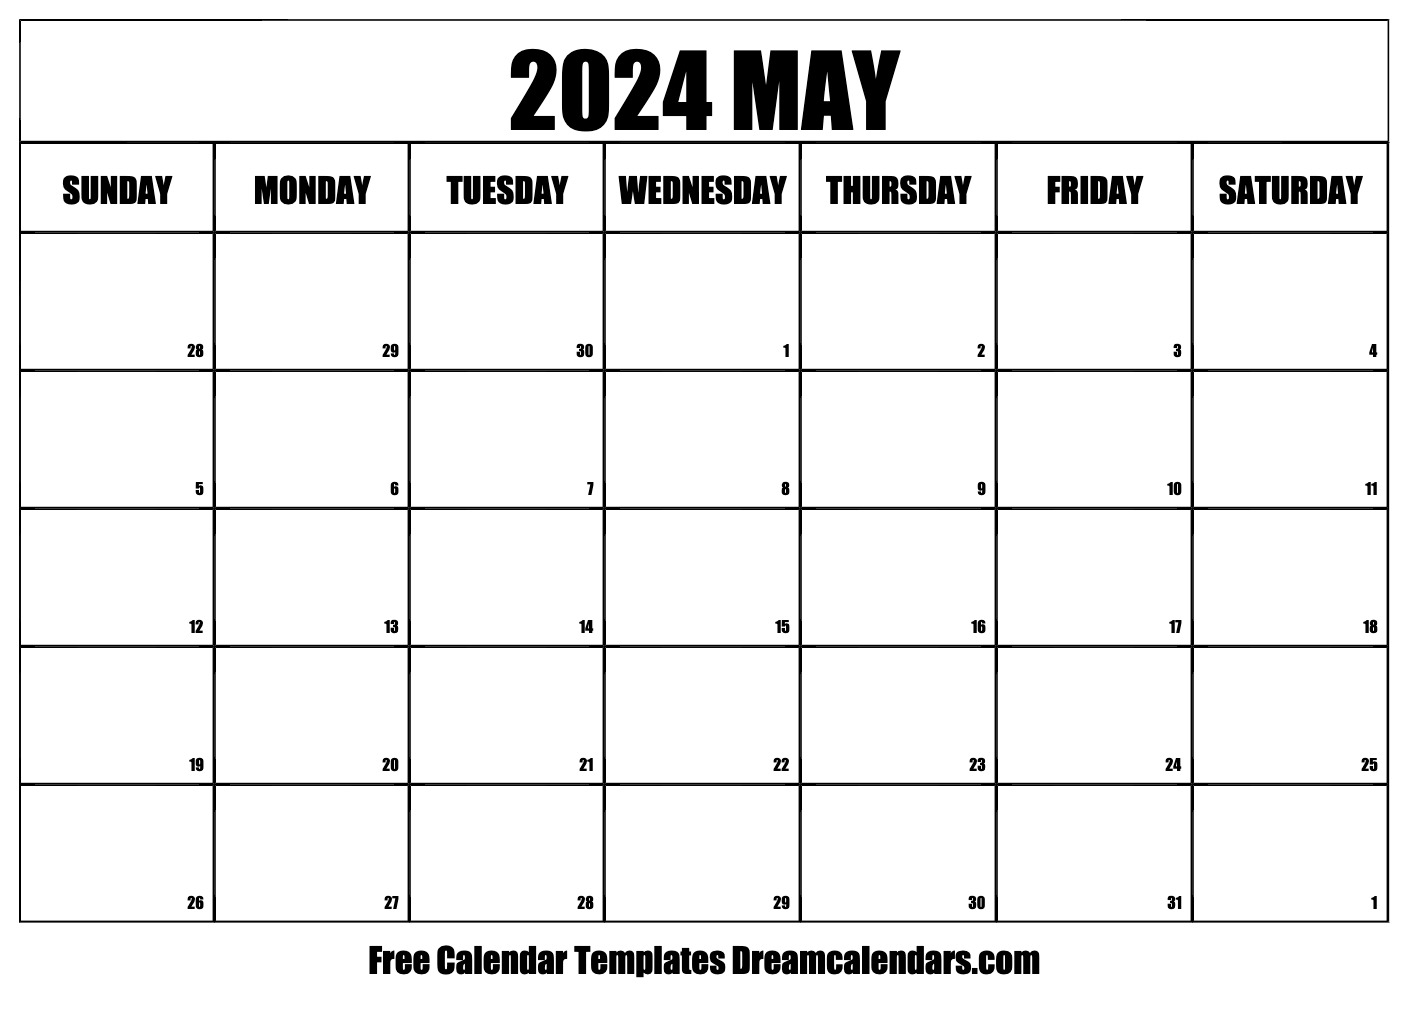 May 2024 Calendar Free Printable with Holidays and Observances